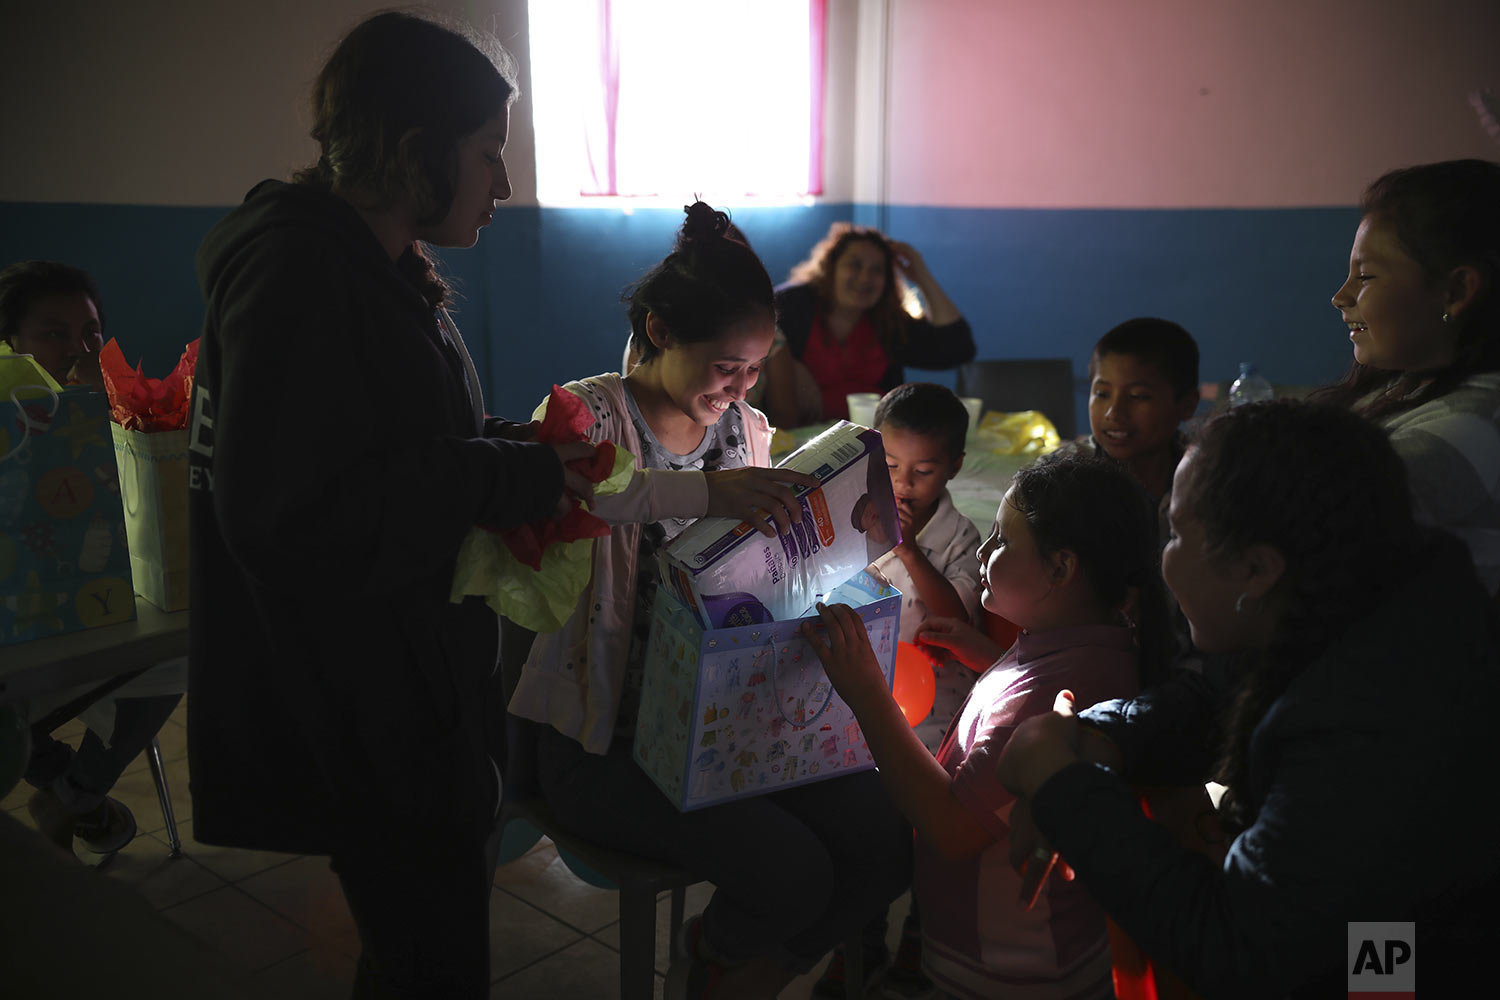  In this May 25, 2019 photo, Salvadoran teen migrant Milagro de Jesus Henriquez Ayala, opens her gifts during her baby shower at at a meeting hall in Tijuana, Mexico.  (AP Photo/Emilio Espejel) 